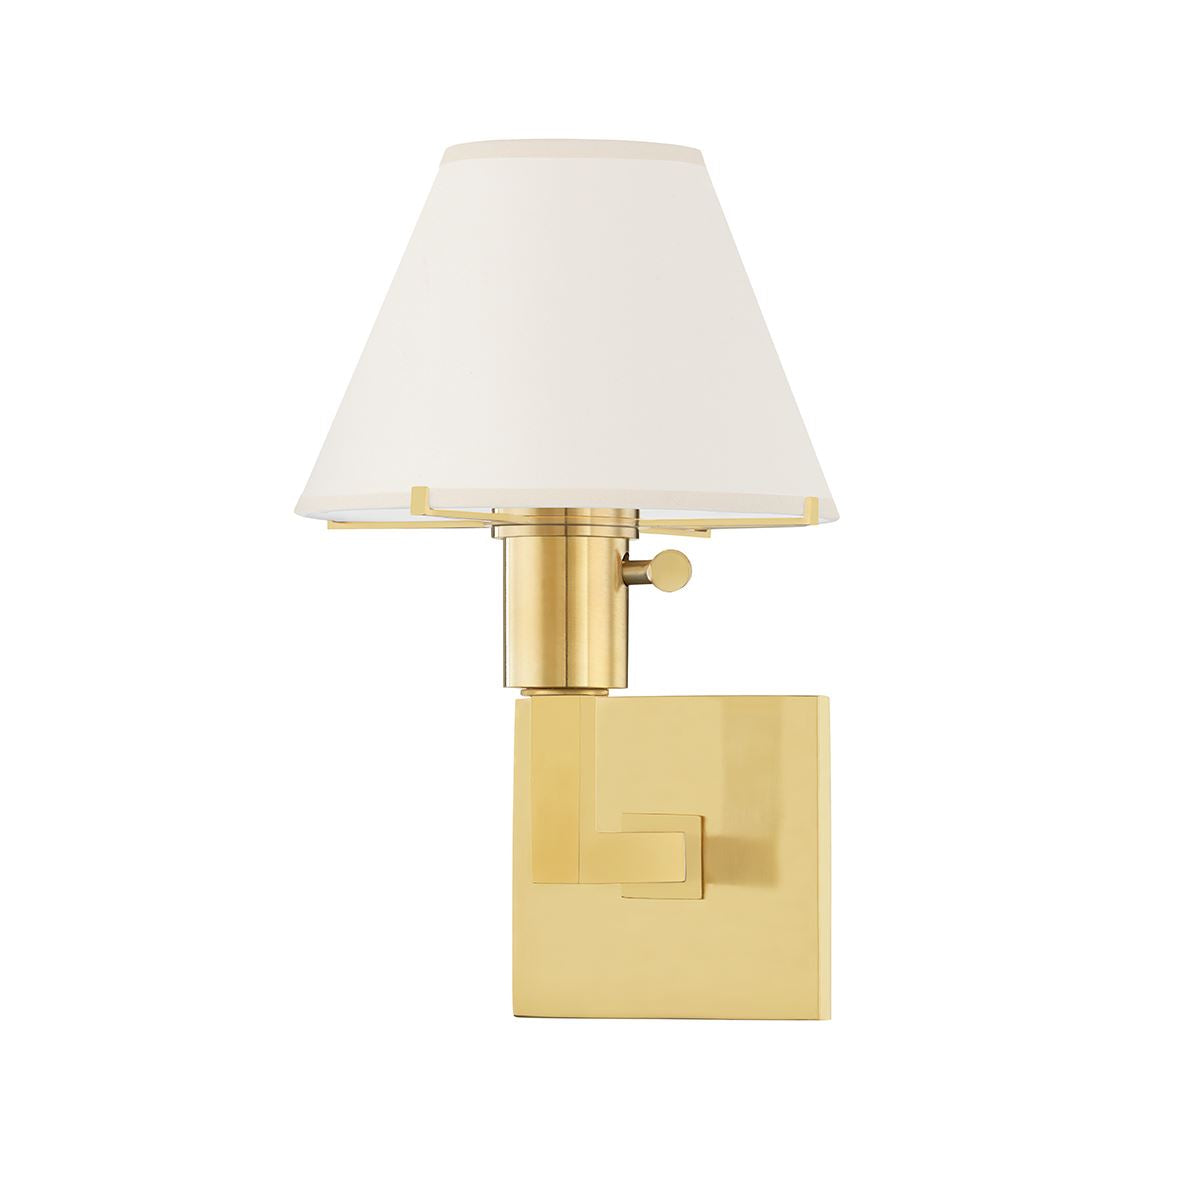 Ellsworth Sconce Aged Brass. Left angle view.